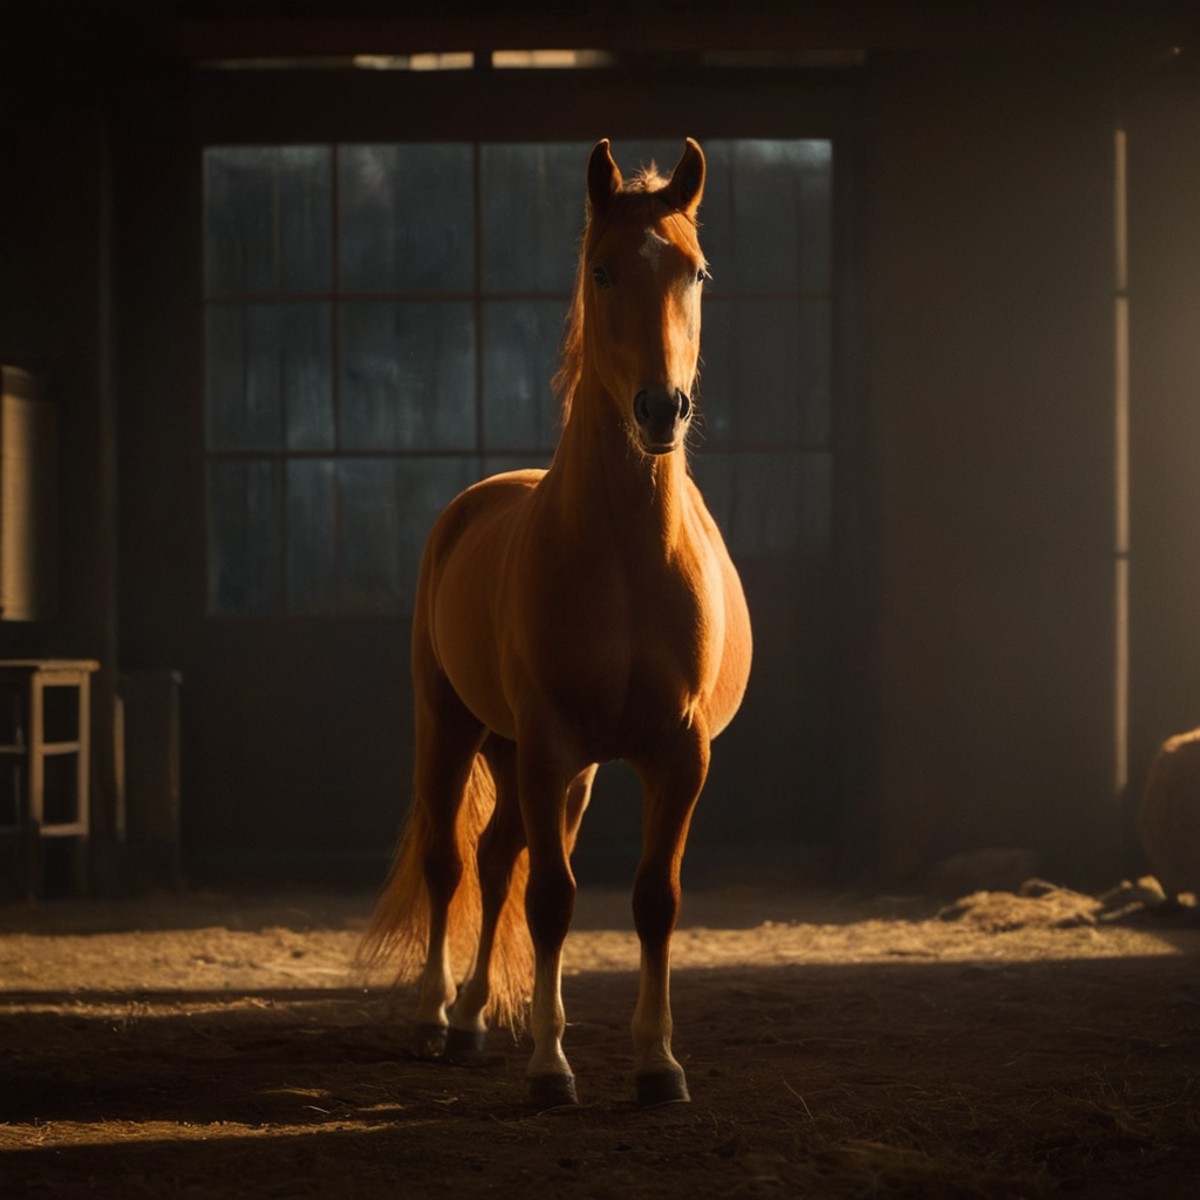 cinematic film still of  <lora:Warm Lighting Style:1>
warm light,a brown horse standing in a dark room,warm lighting style...